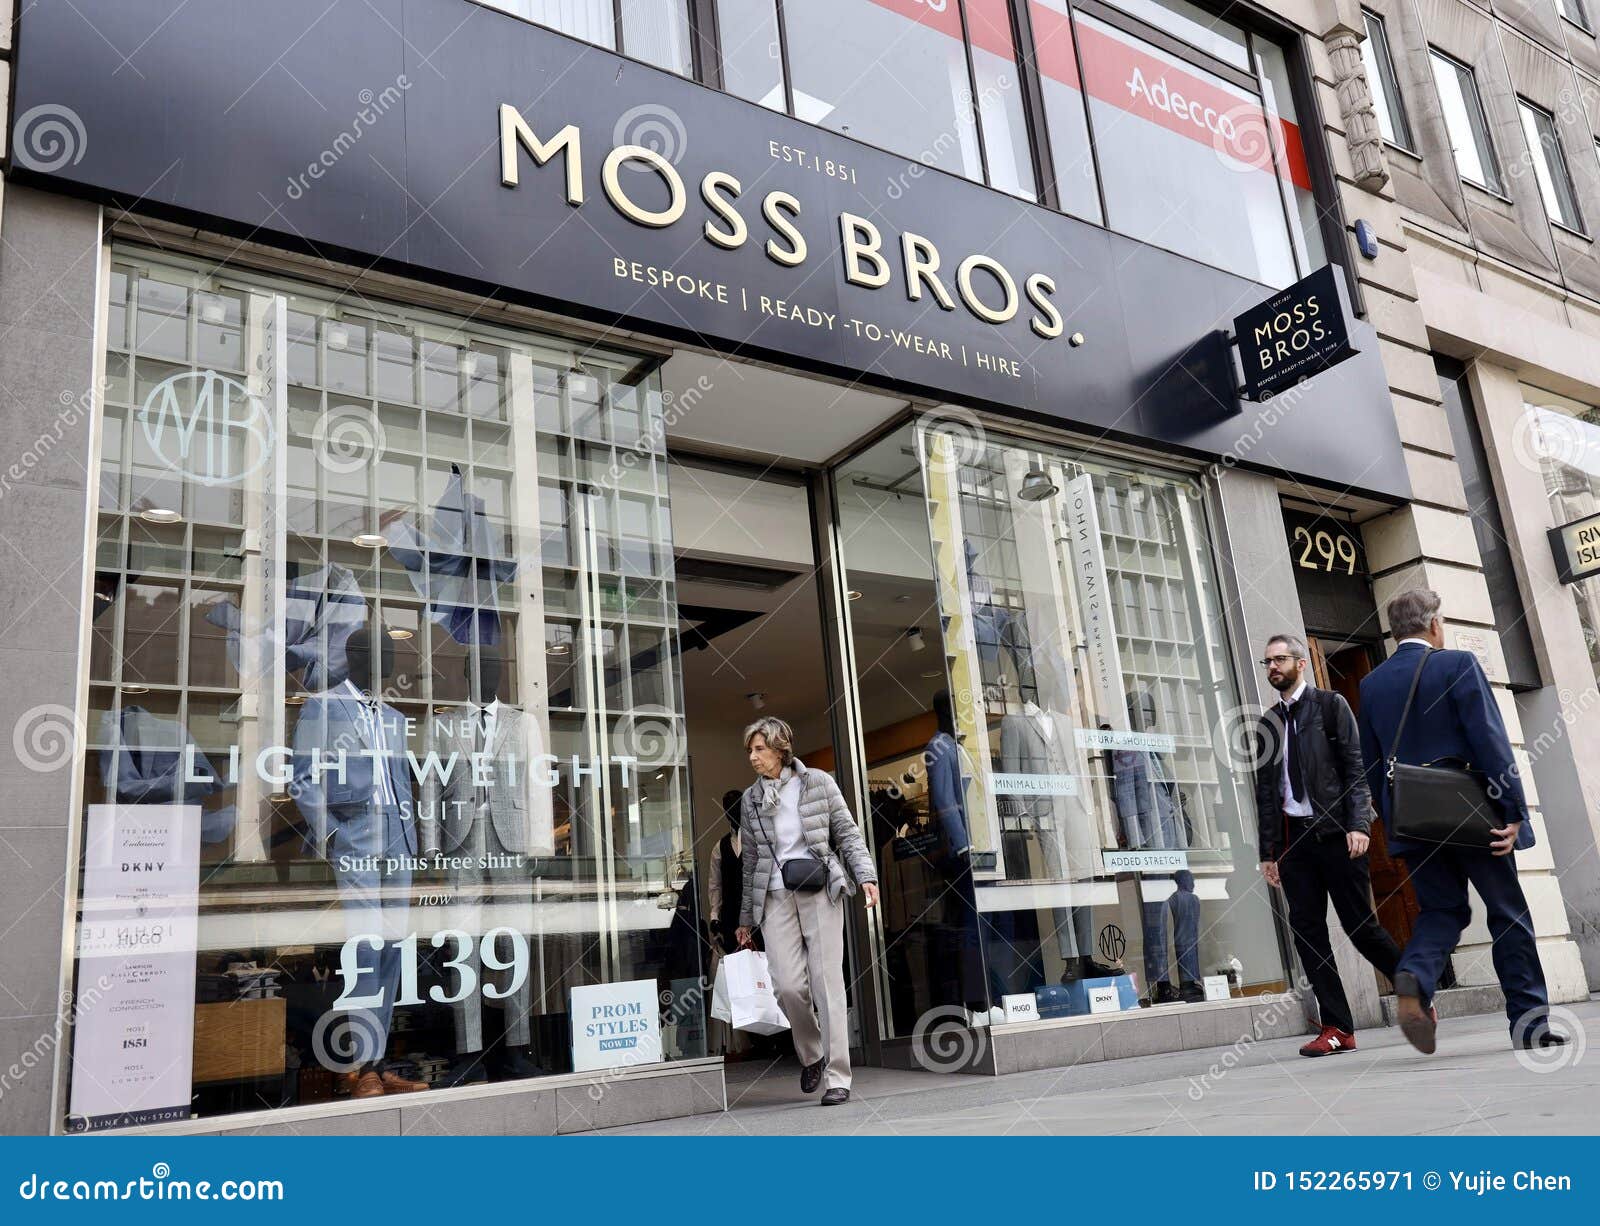 Moss Bros Store on the Oxford Street, London Editorial Photo - Image of ...